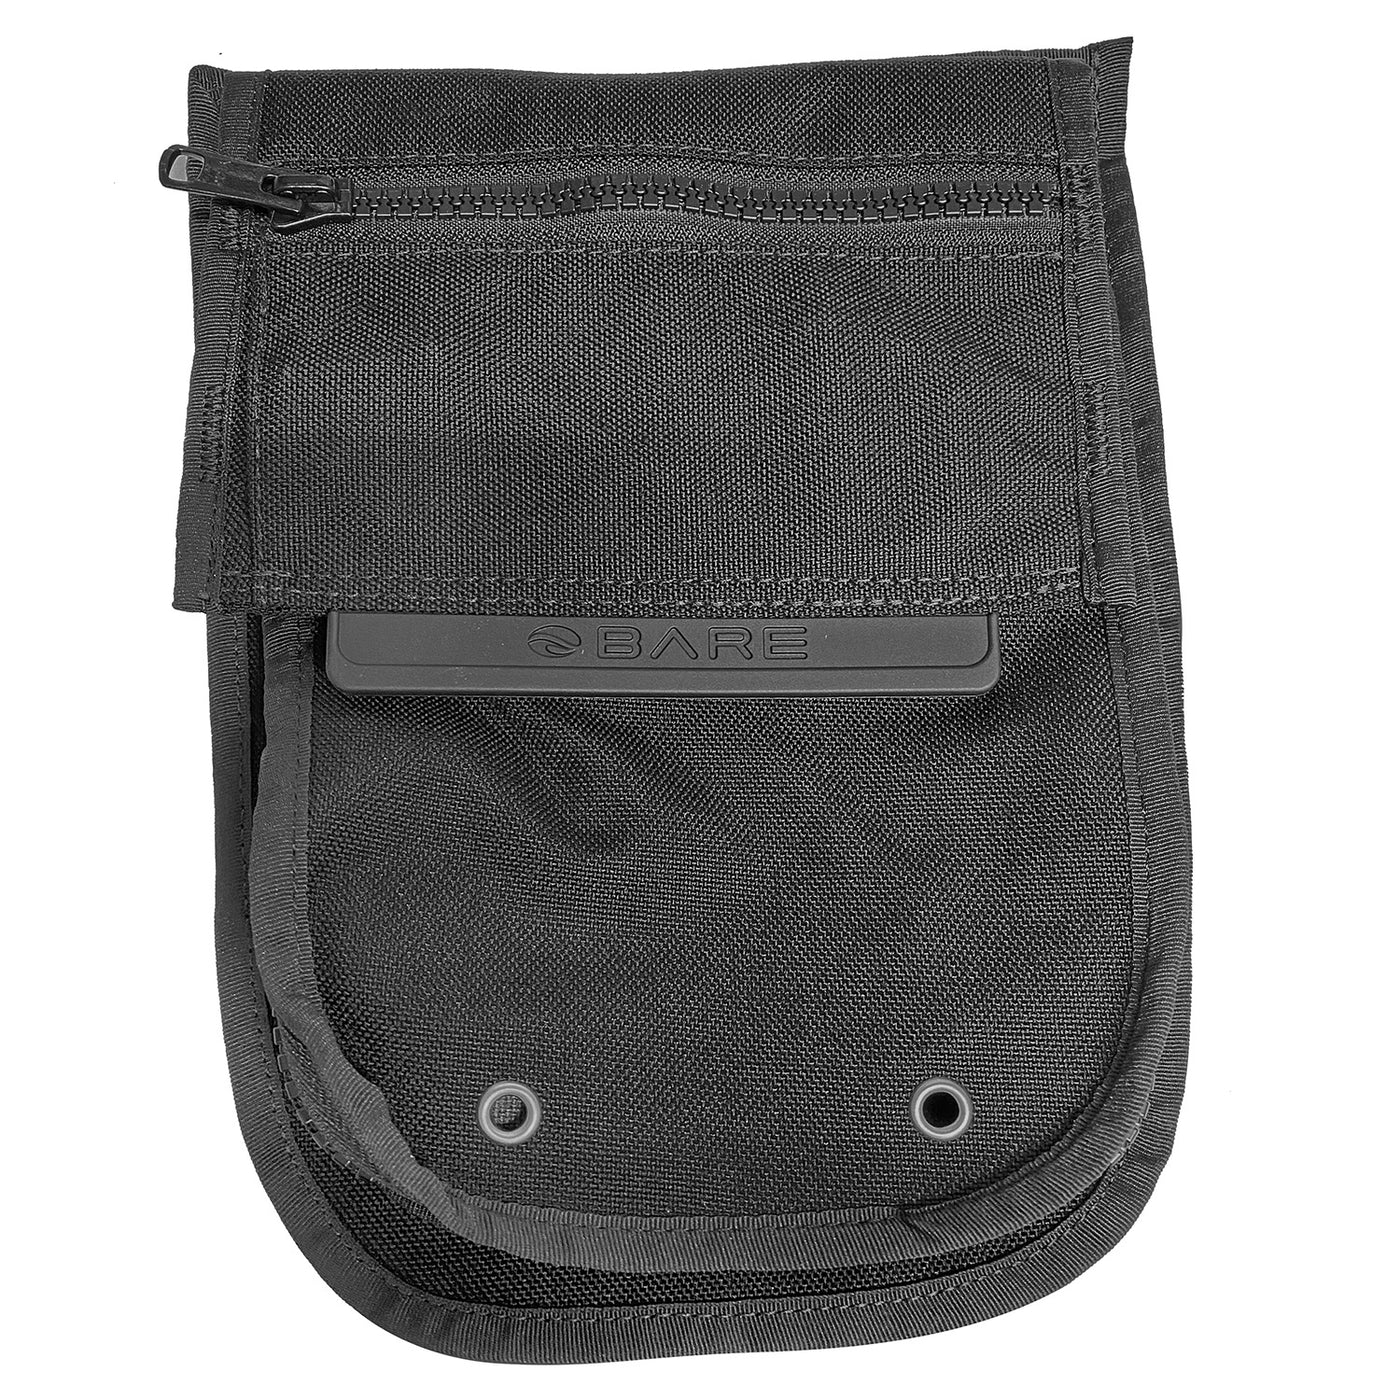 BARE Tech Pocket with flap zip